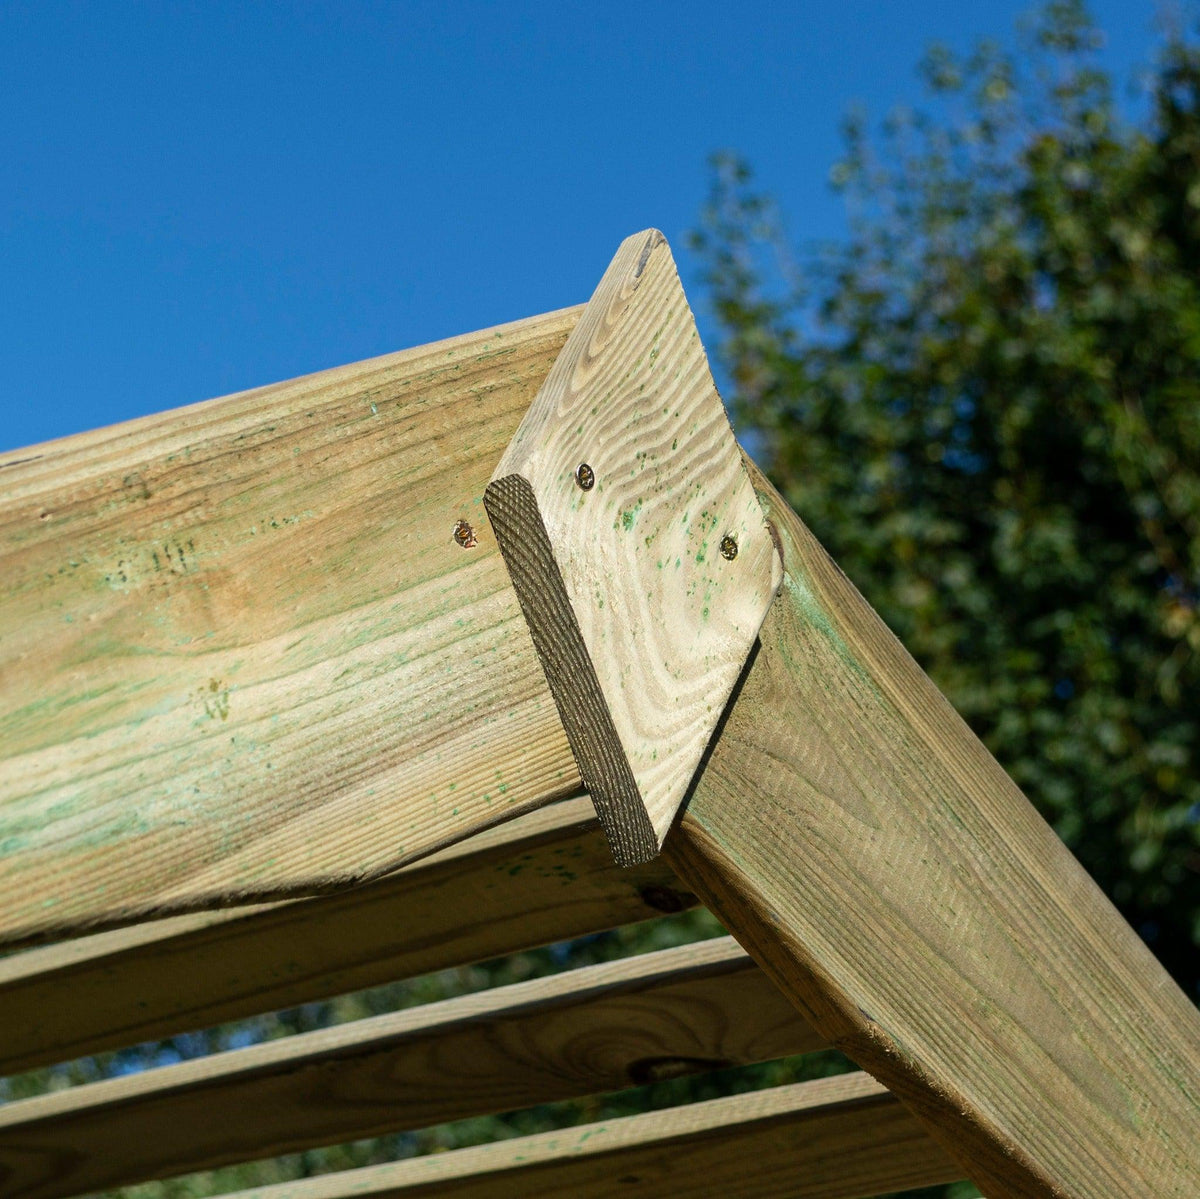 Garden Arbour with Roof, trellis and seat storage, Tanalised Timber